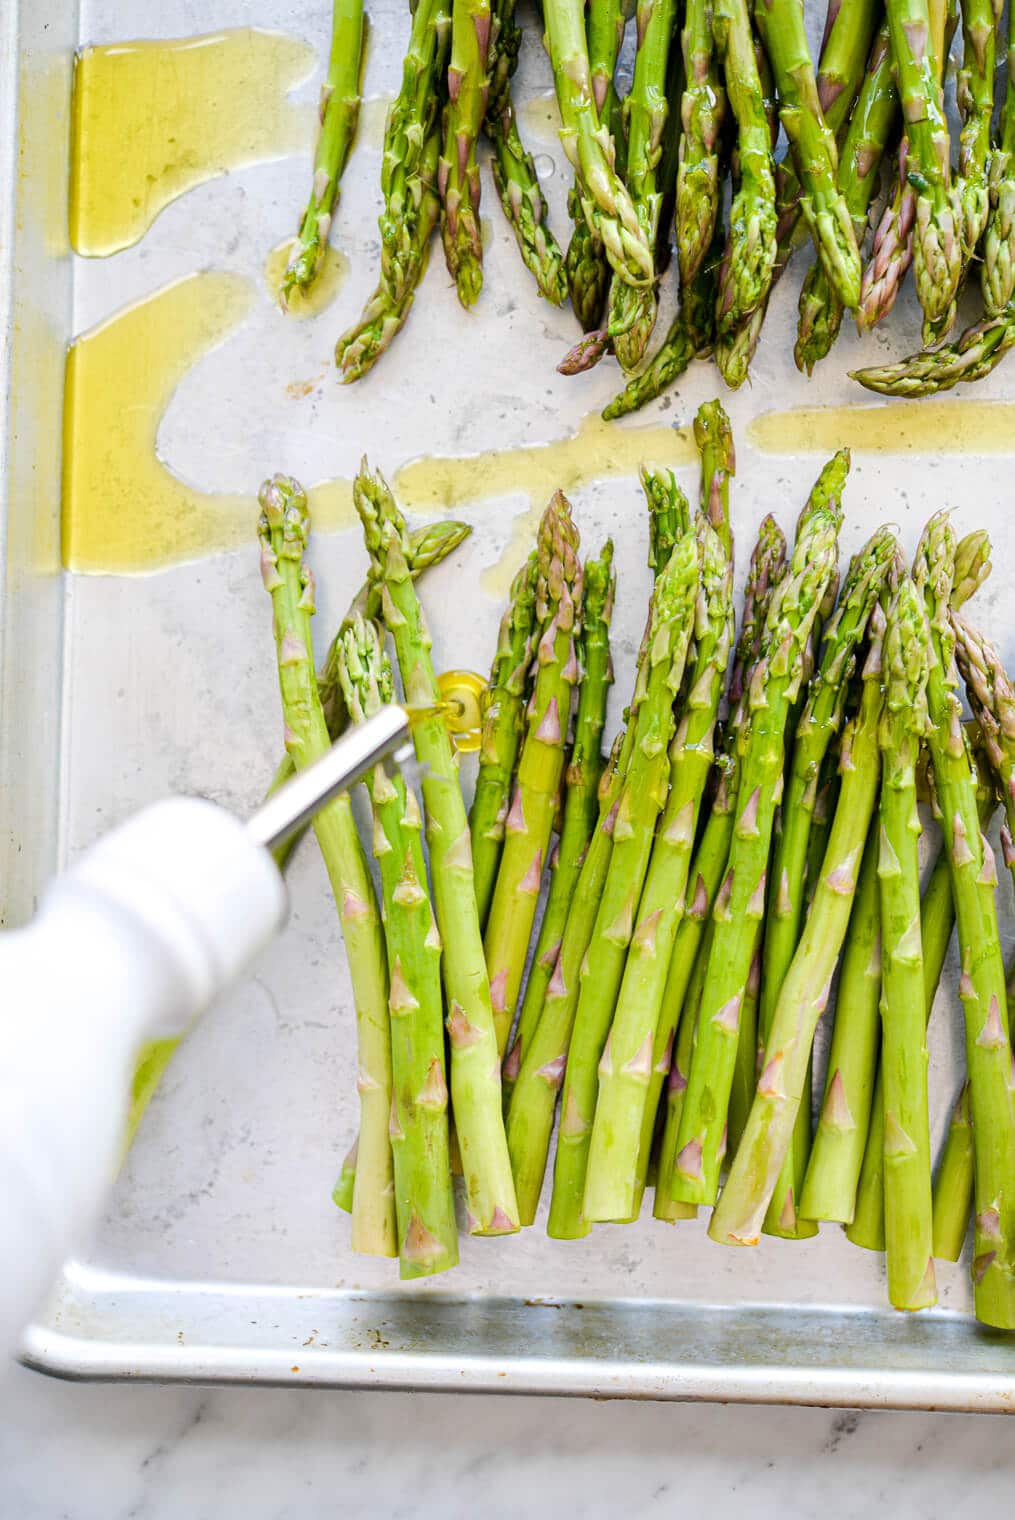 Metal sheet pan with two rows of asparagus being drizzled with olive oil from olive oil dispenser